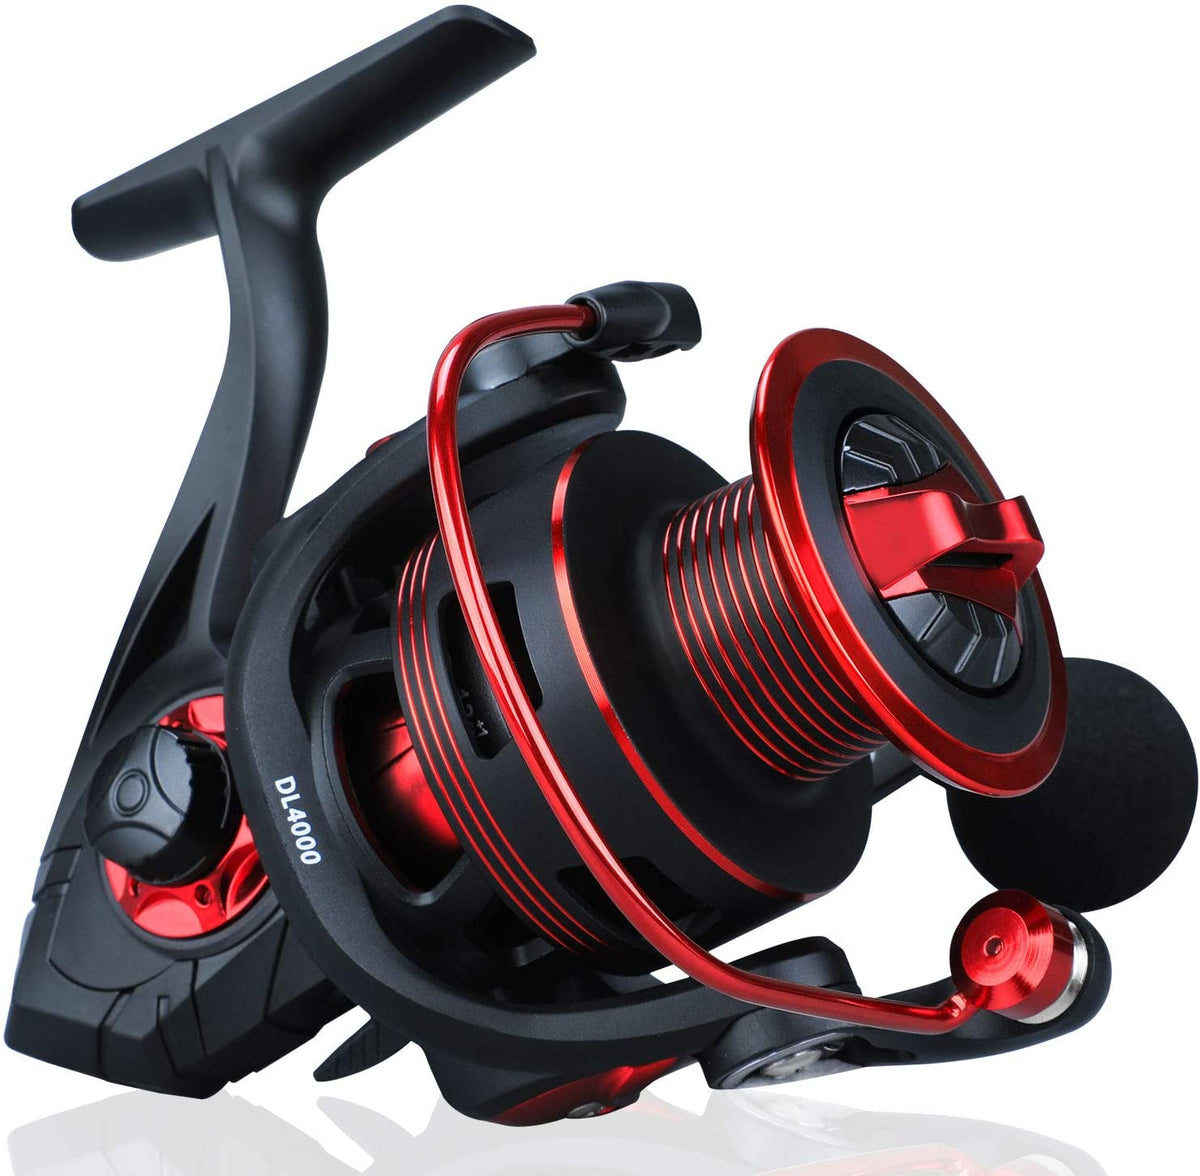 Spinning Fishing Reel Ultra Smooth Powerful Light Weight Carbon Fiber with  5.5:1 Gear Ratio Metal Body Collapsible Handle13+1BB for Freshwater Saltwater  Fishing Green XF3000